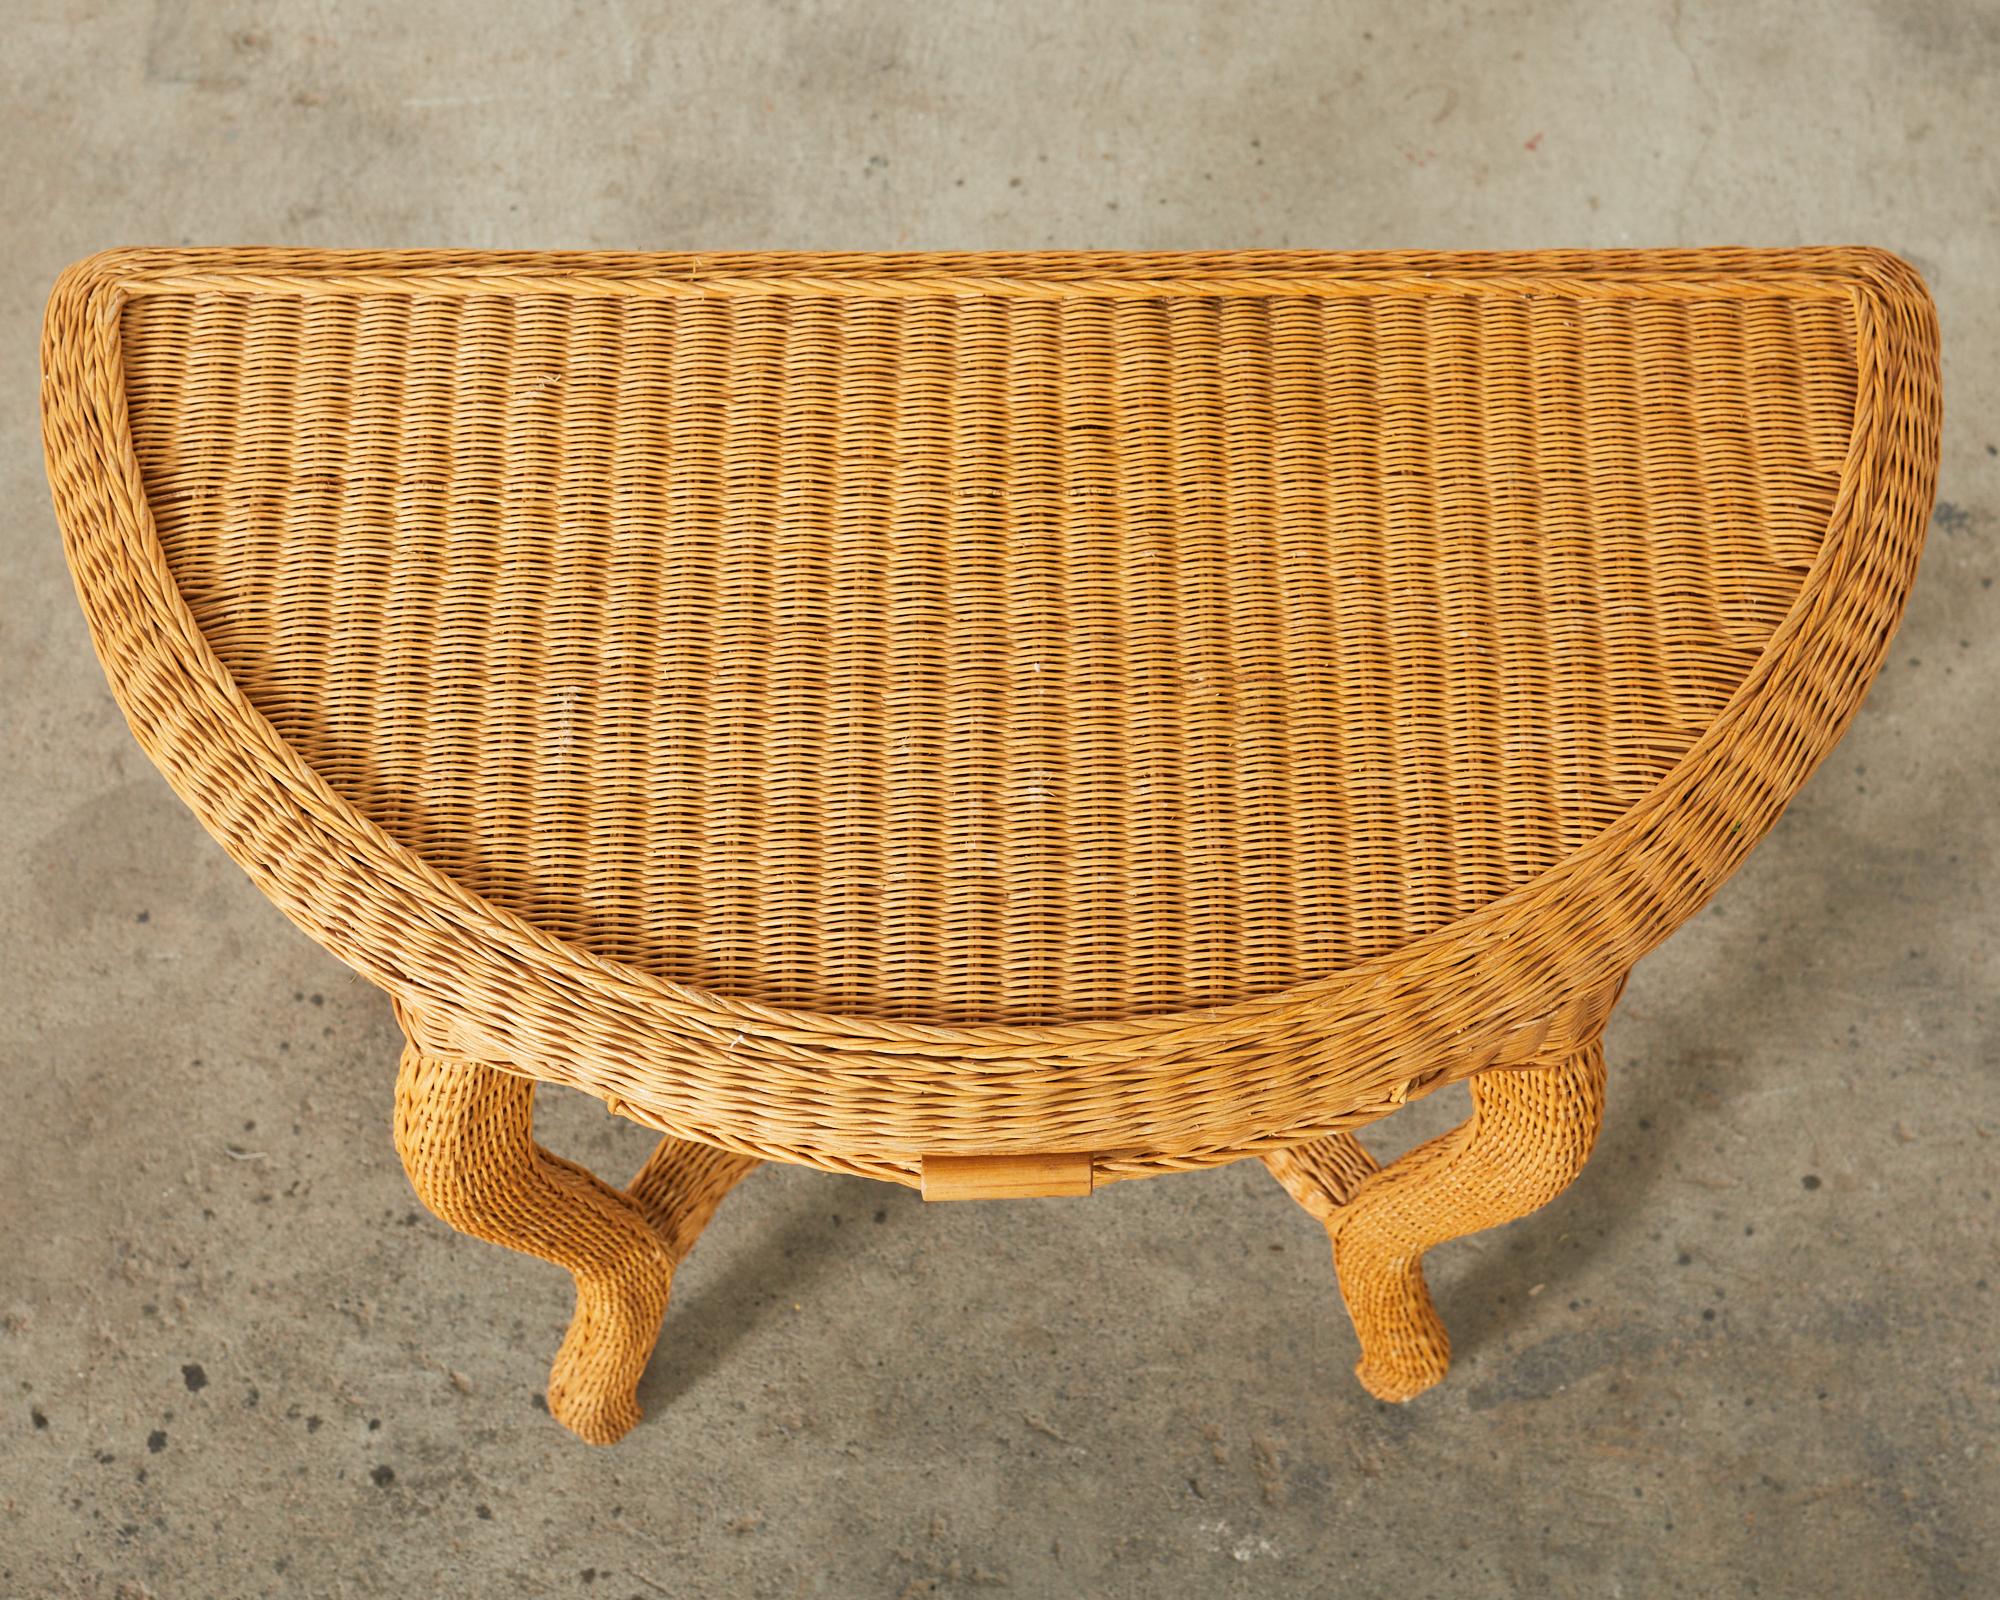 20th Century French Midcentury Organic Modern Wicker Demilune Console For Sale